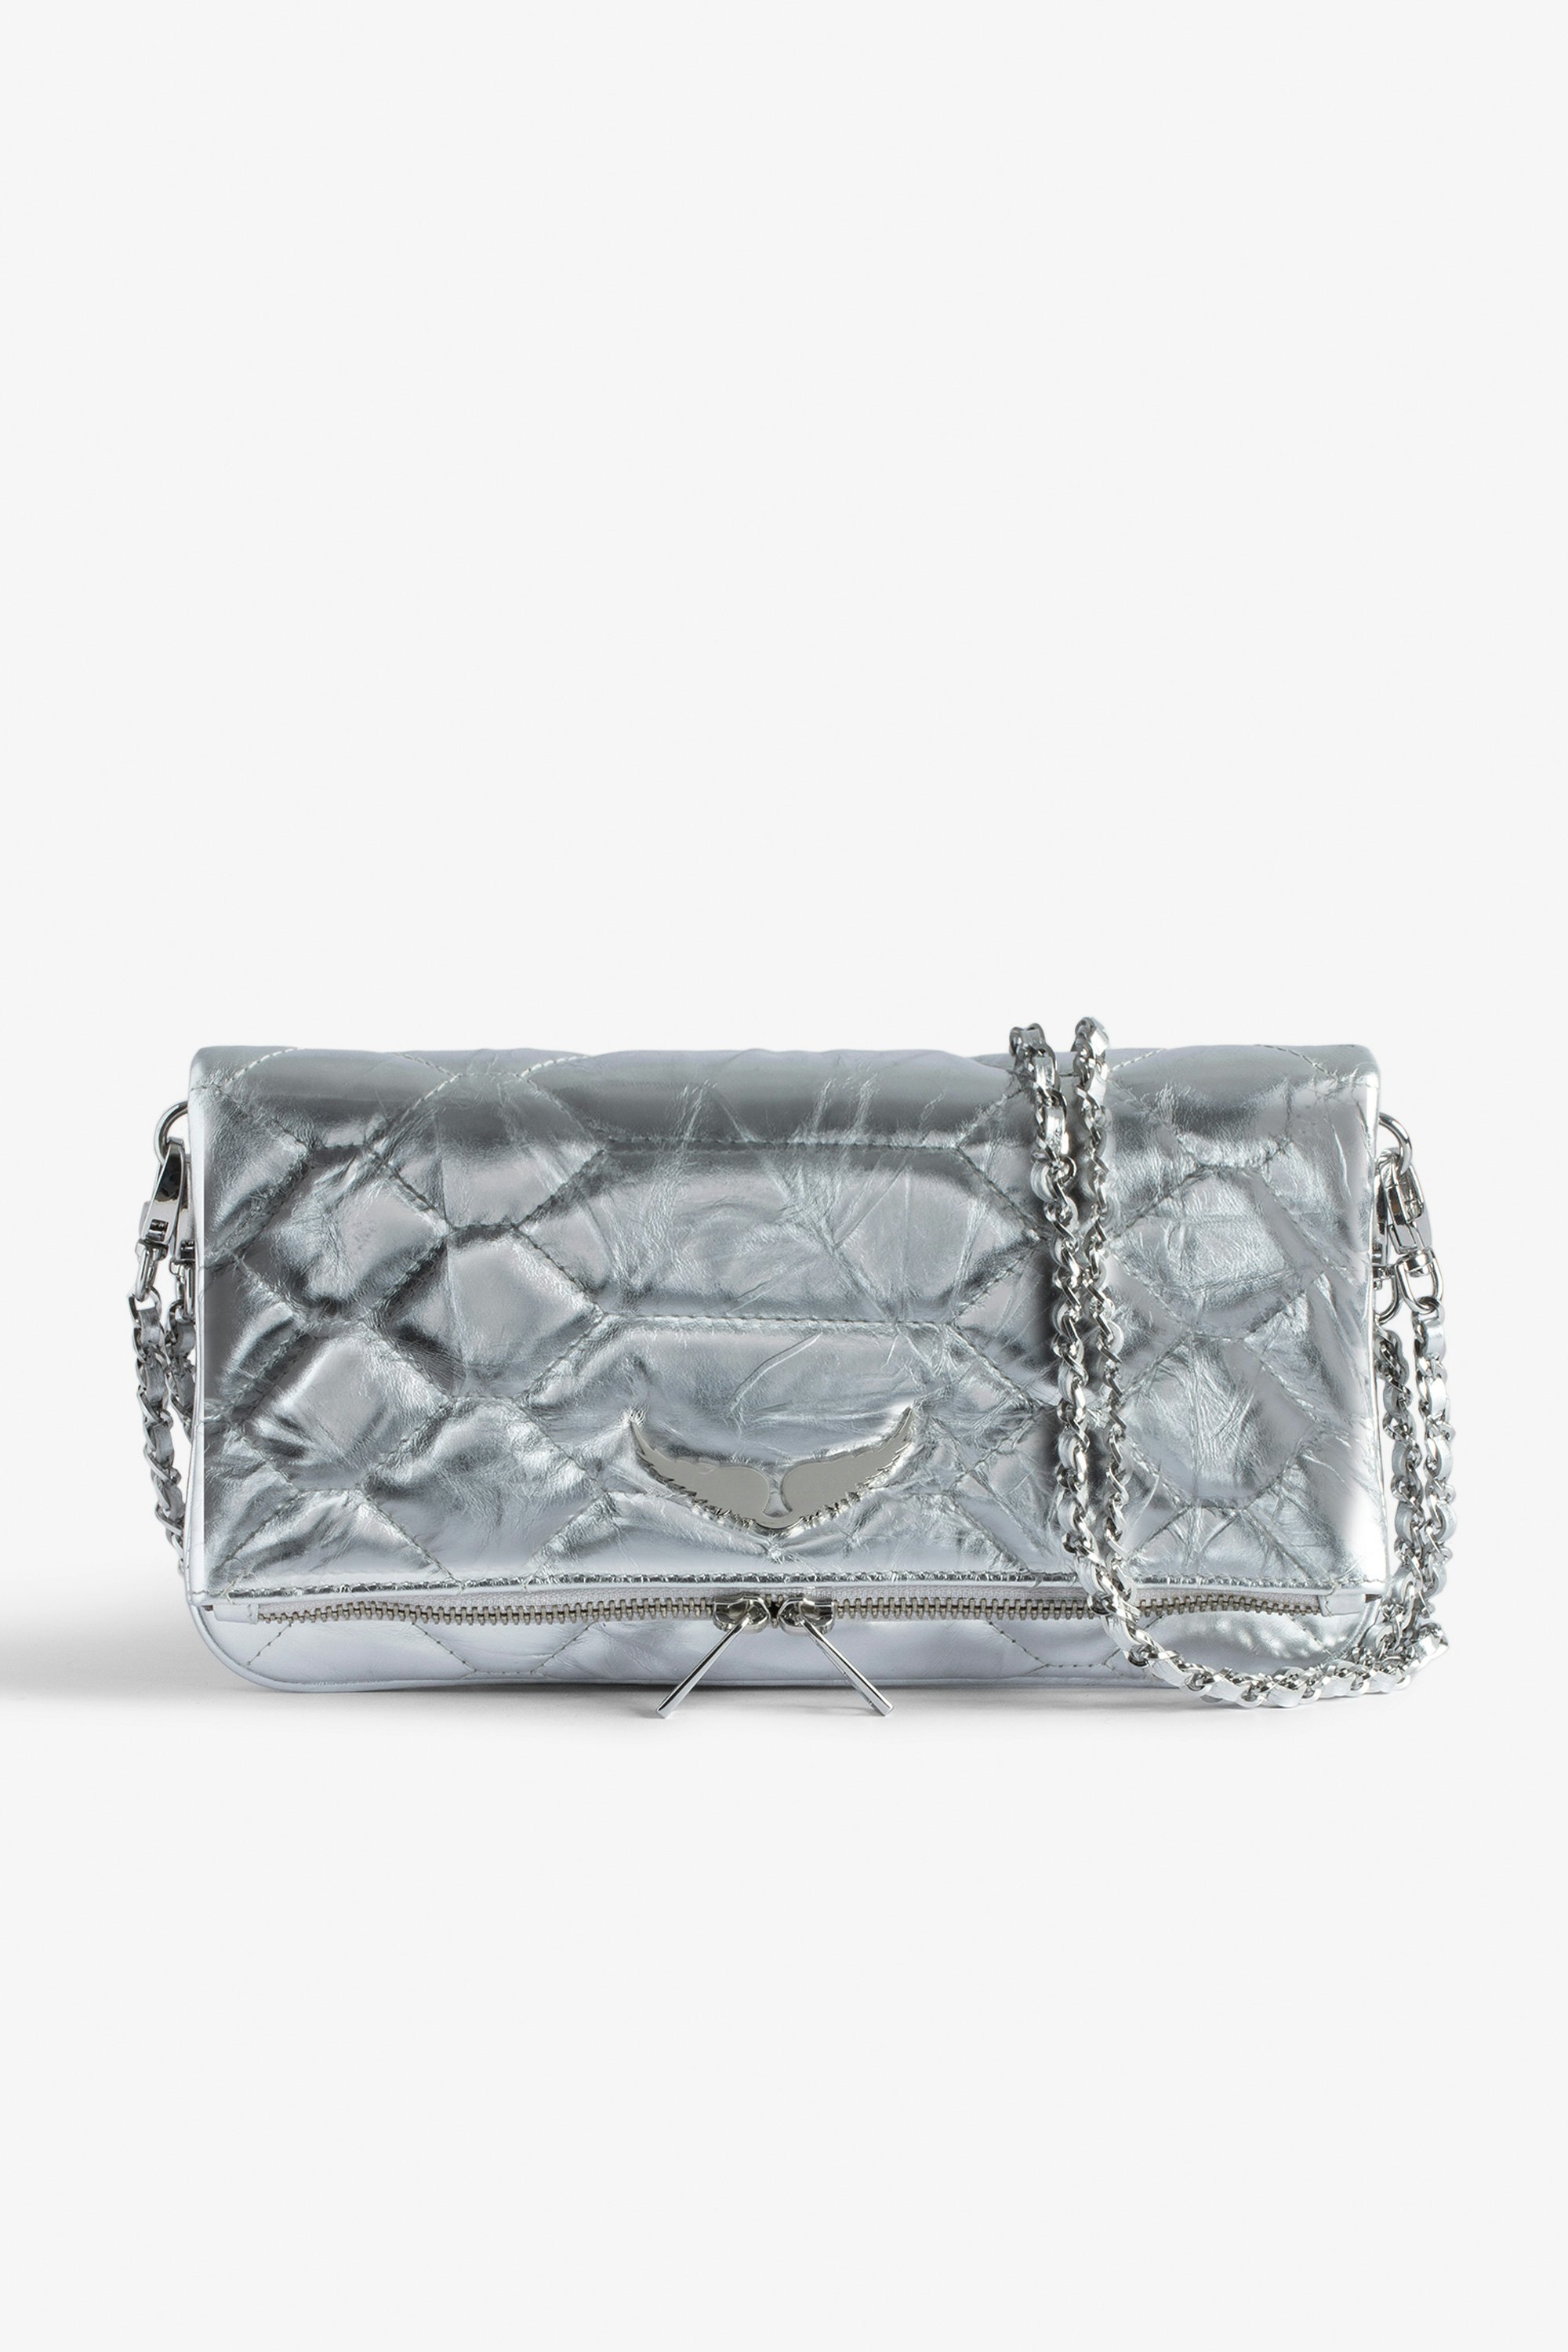 Rock Quilted Metallic Clutch - Rock silver snakeskin-effect metallic, crinkled, quilted leather clutch with double leather and metal chain.